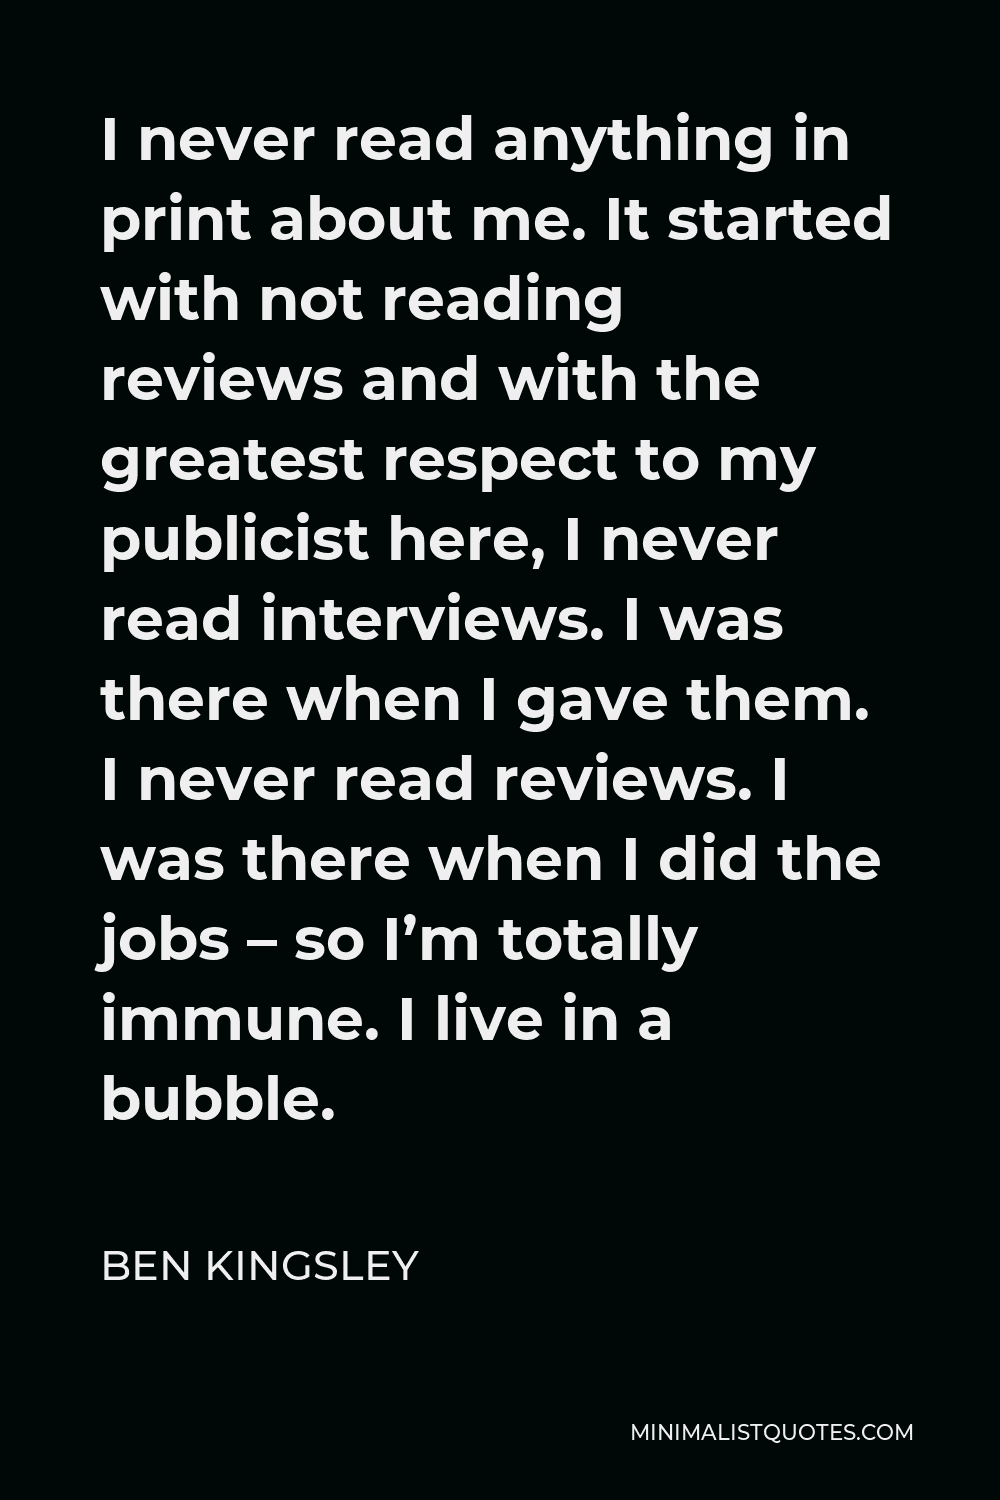 Ben Kingsley Quote - I never read anything in print about me. It started with not reading reviews and with the greatest respect to my publicist here, I never read interviews. I was there when I gave them. I never read reviews. I was there when I did the jobs – so I’m totally immune. I live in a bubble.